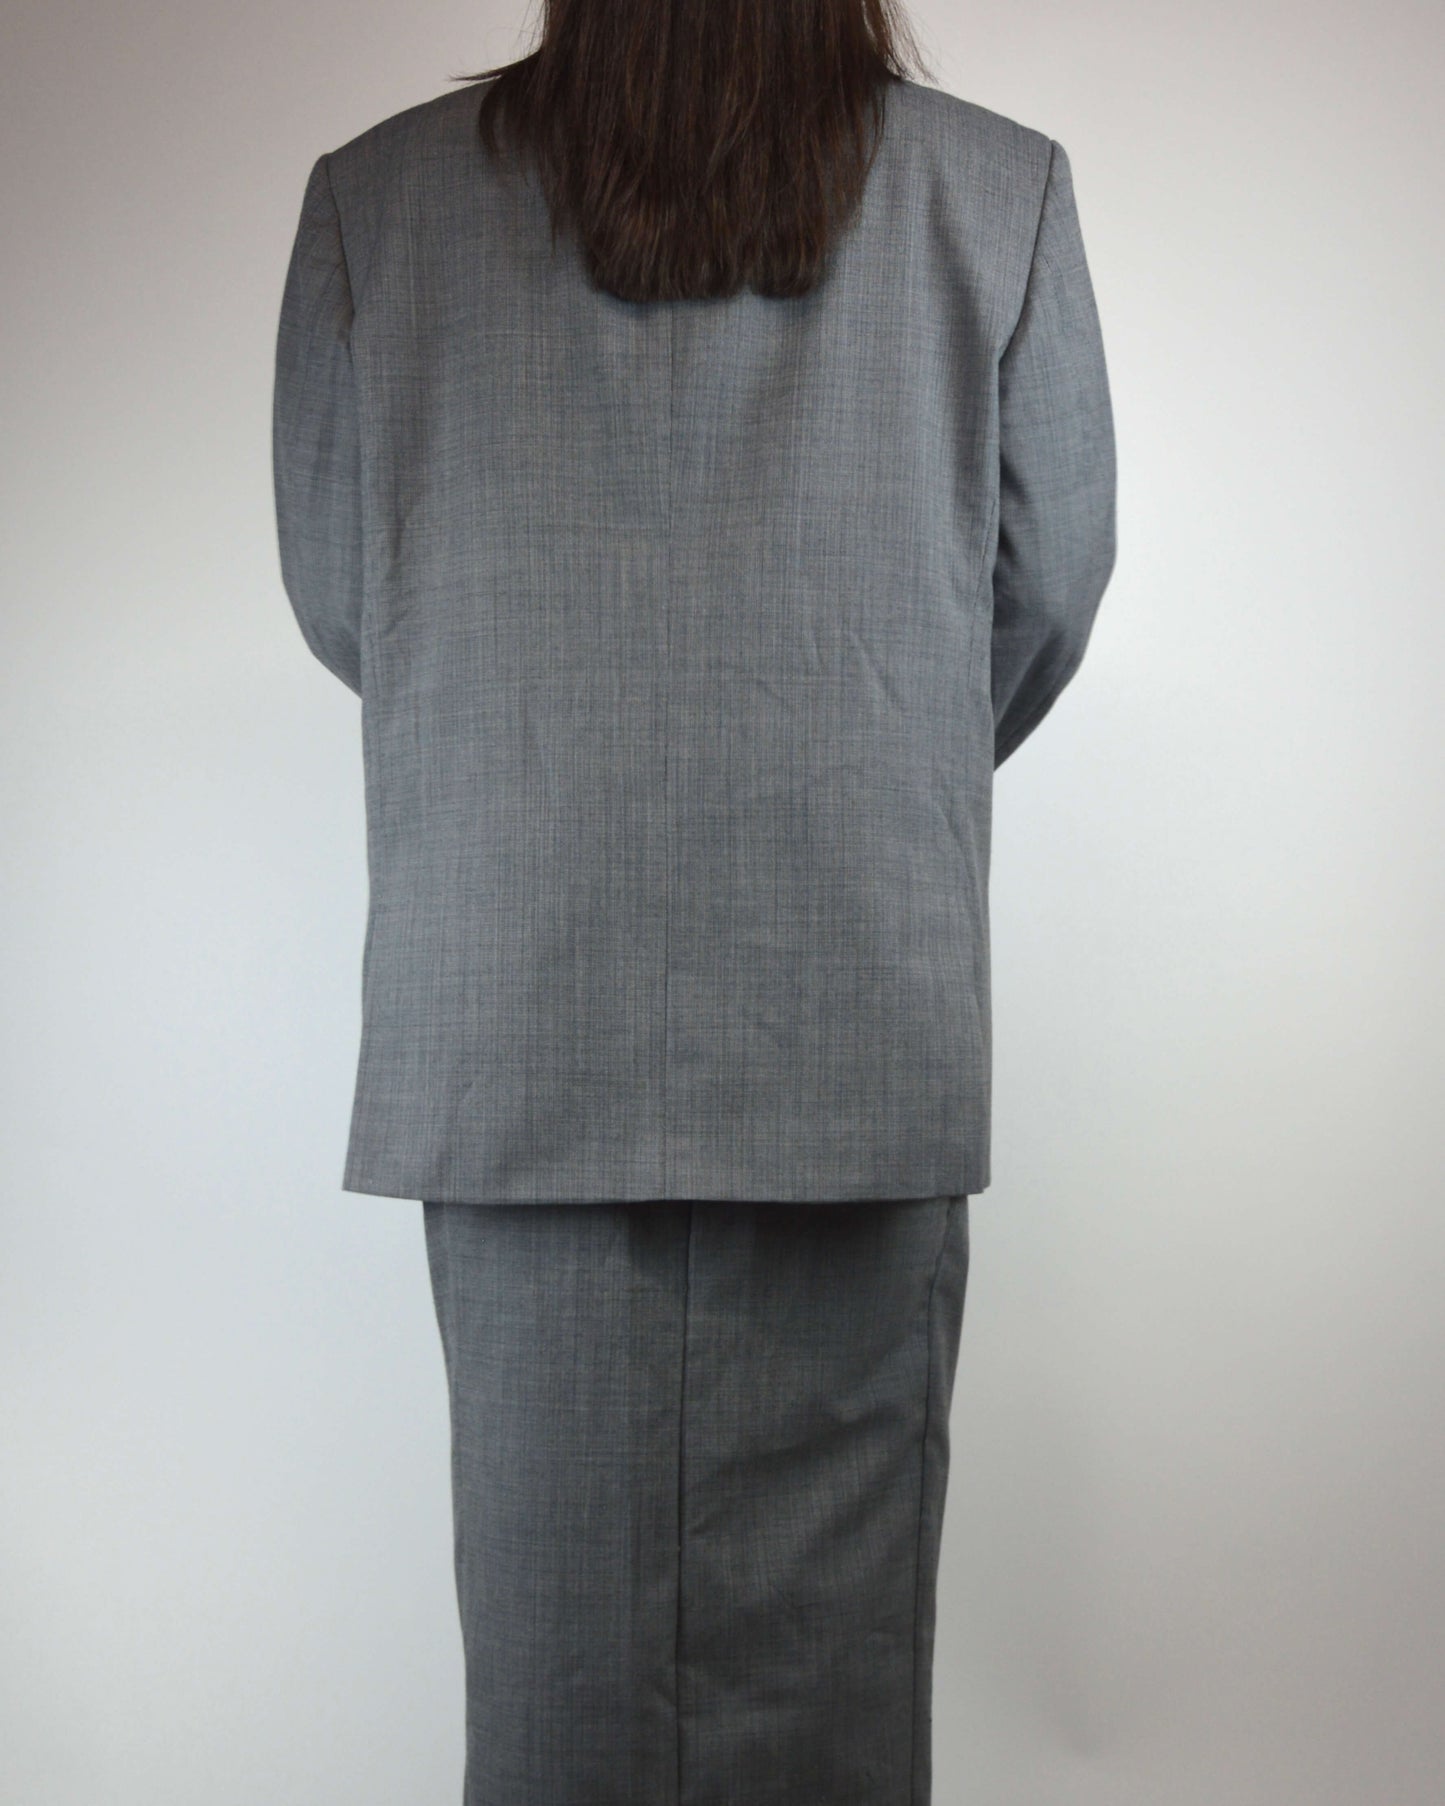 Skirt Suit - Marbeled Grey (S/M)